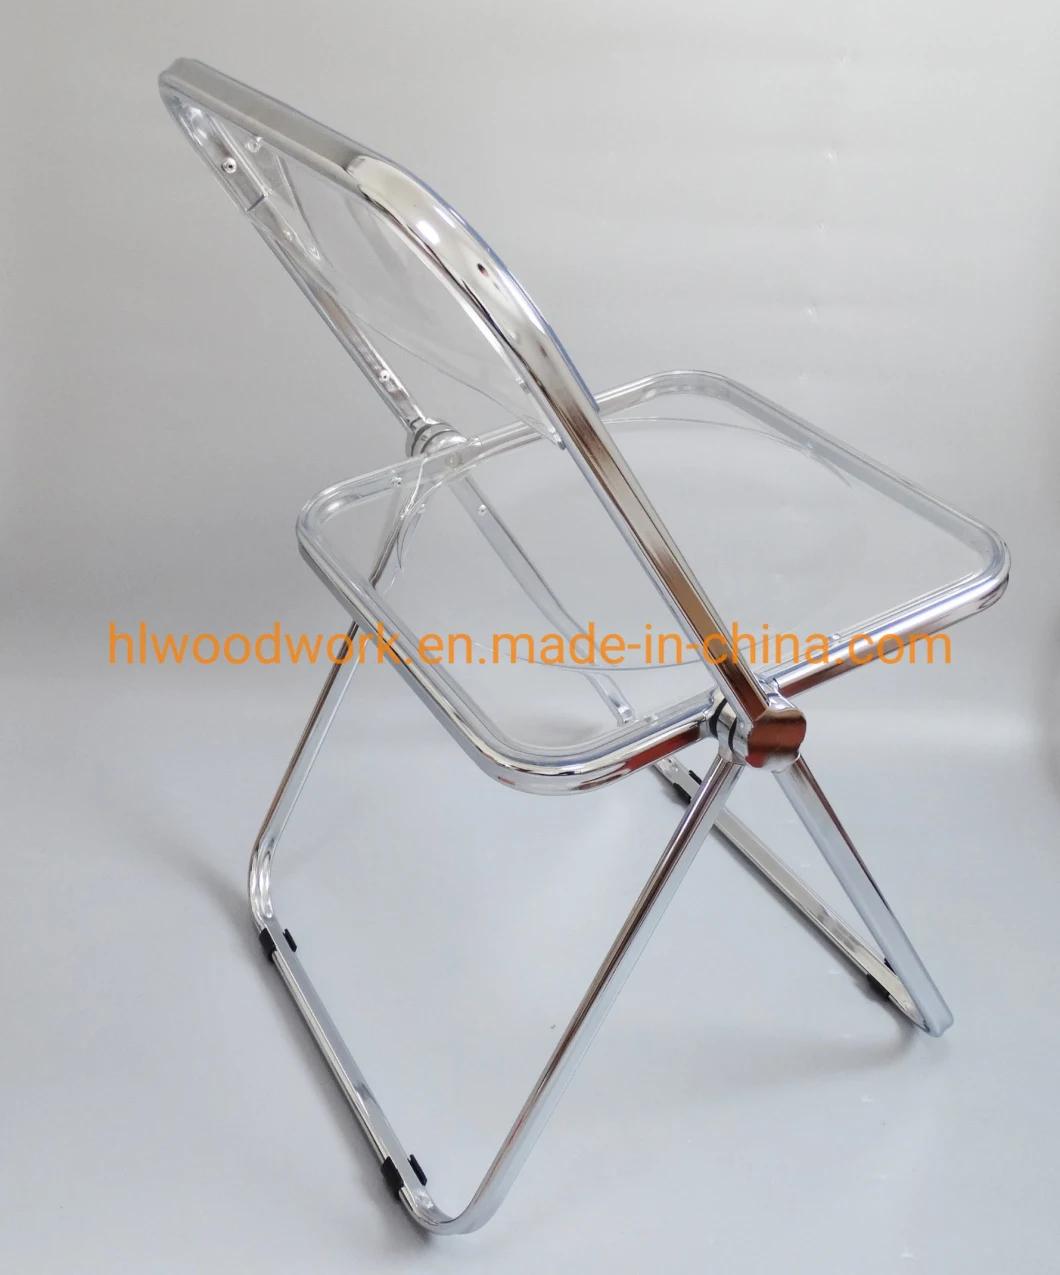 Modern Transparent Black Folding Chair PC Plastic Dining Room Chair Chrome Frame Office Bar Dining Leisure Banquet Wedding Meeting Chair Plastic Dining Chair